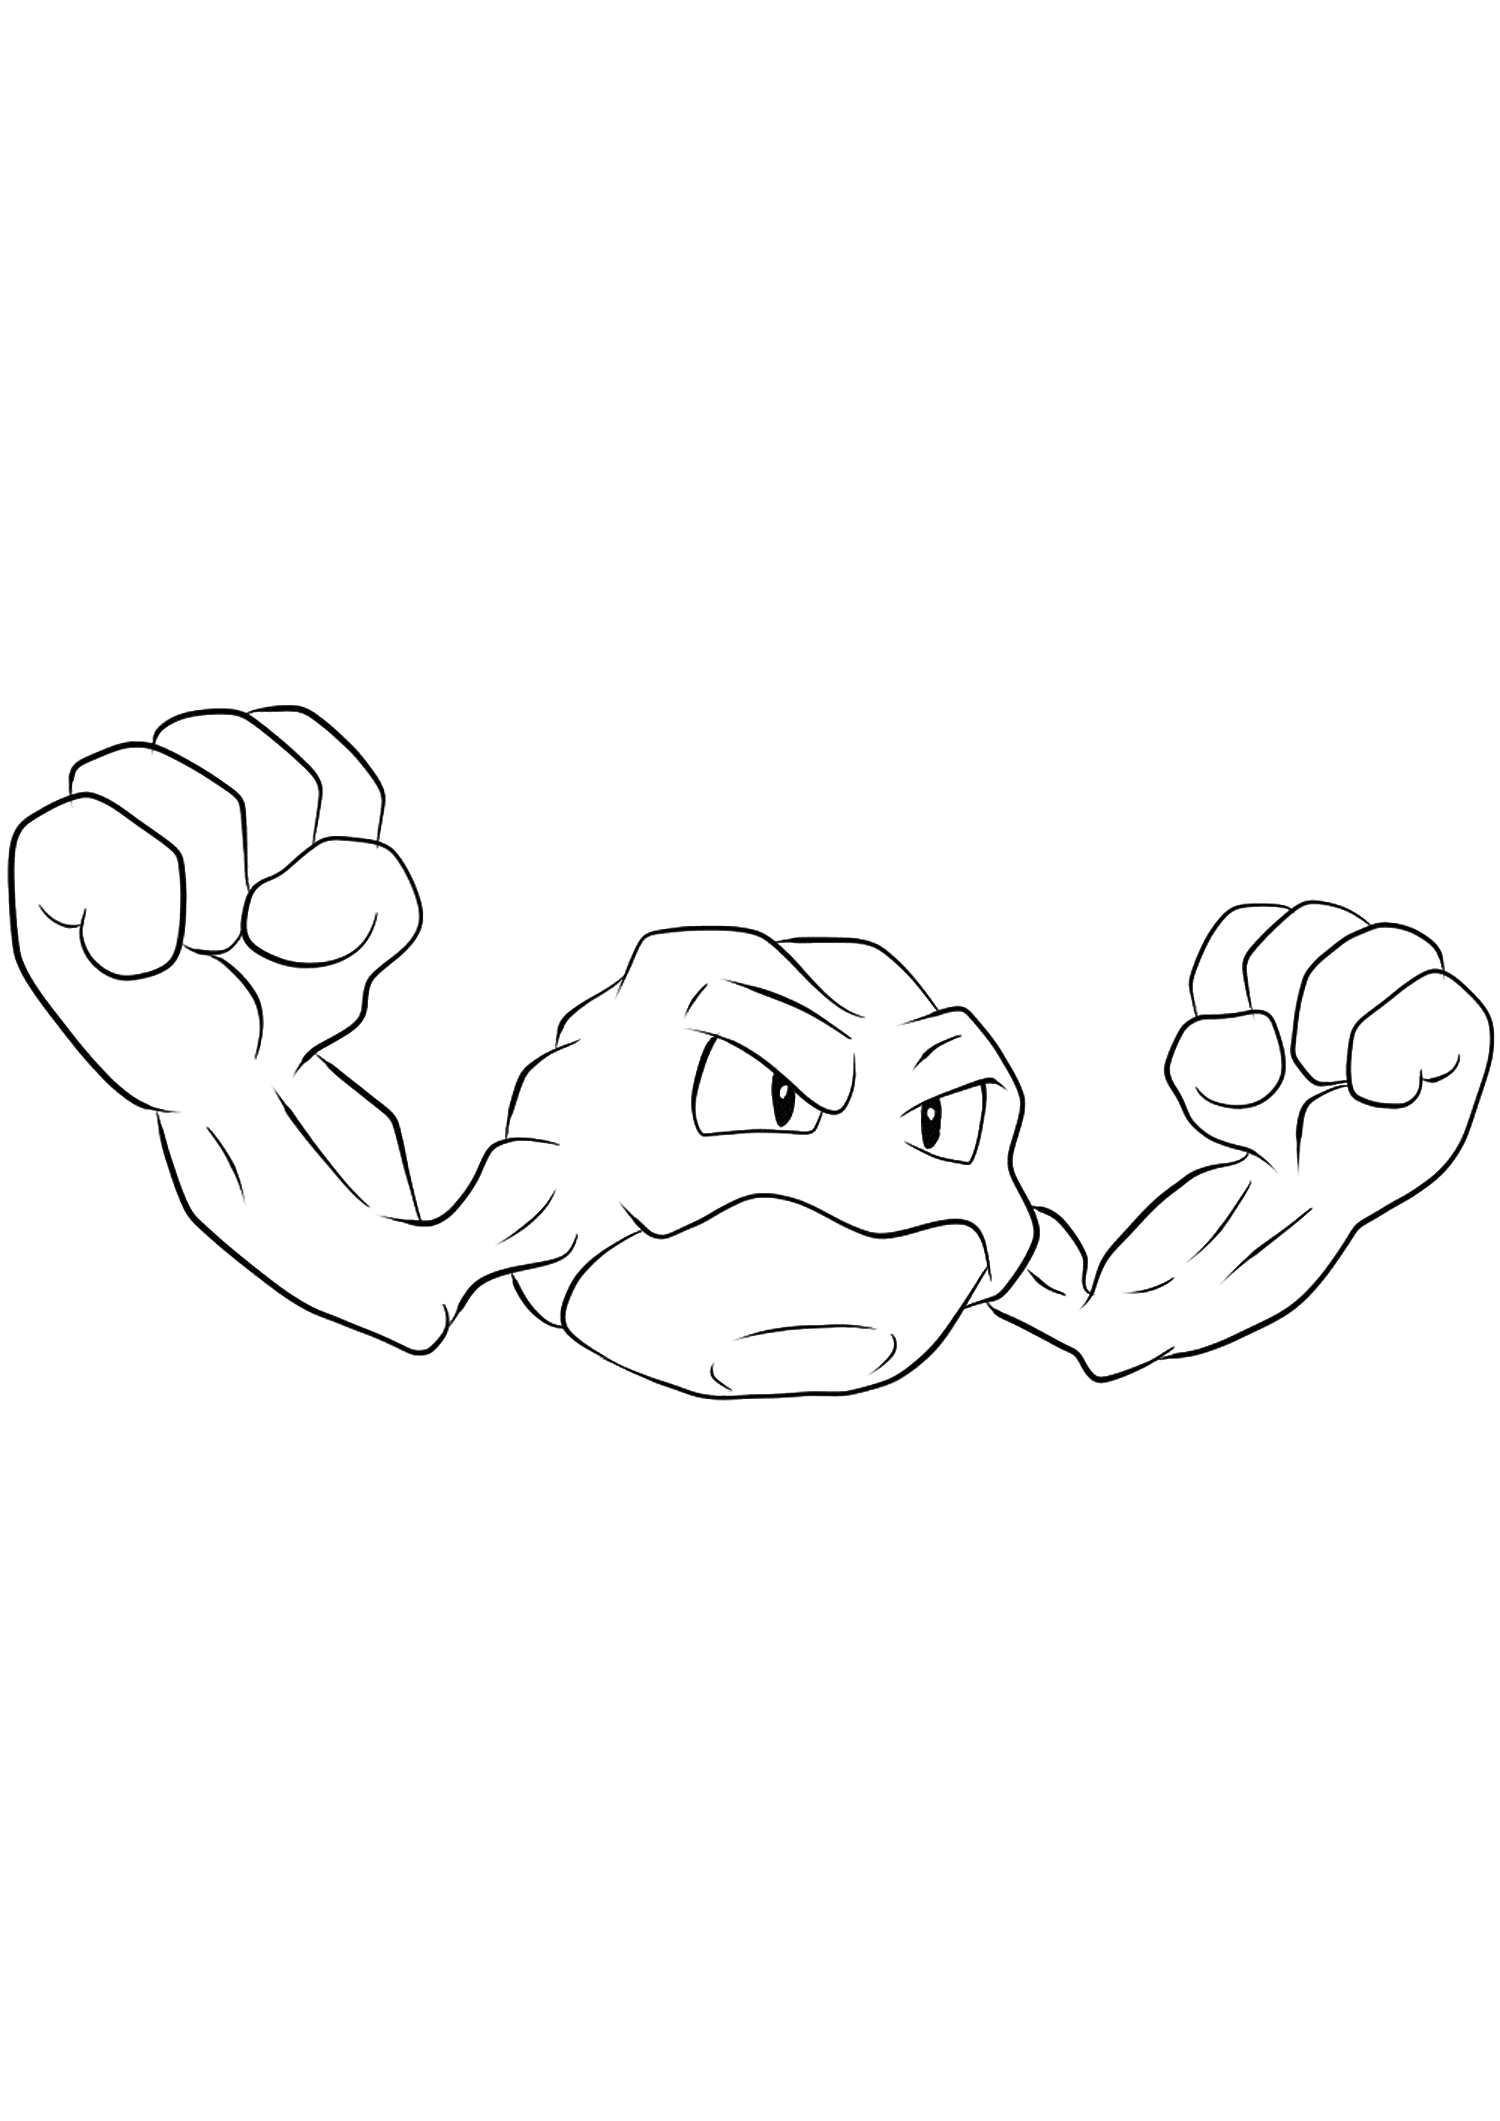 Geodude Coloring Page